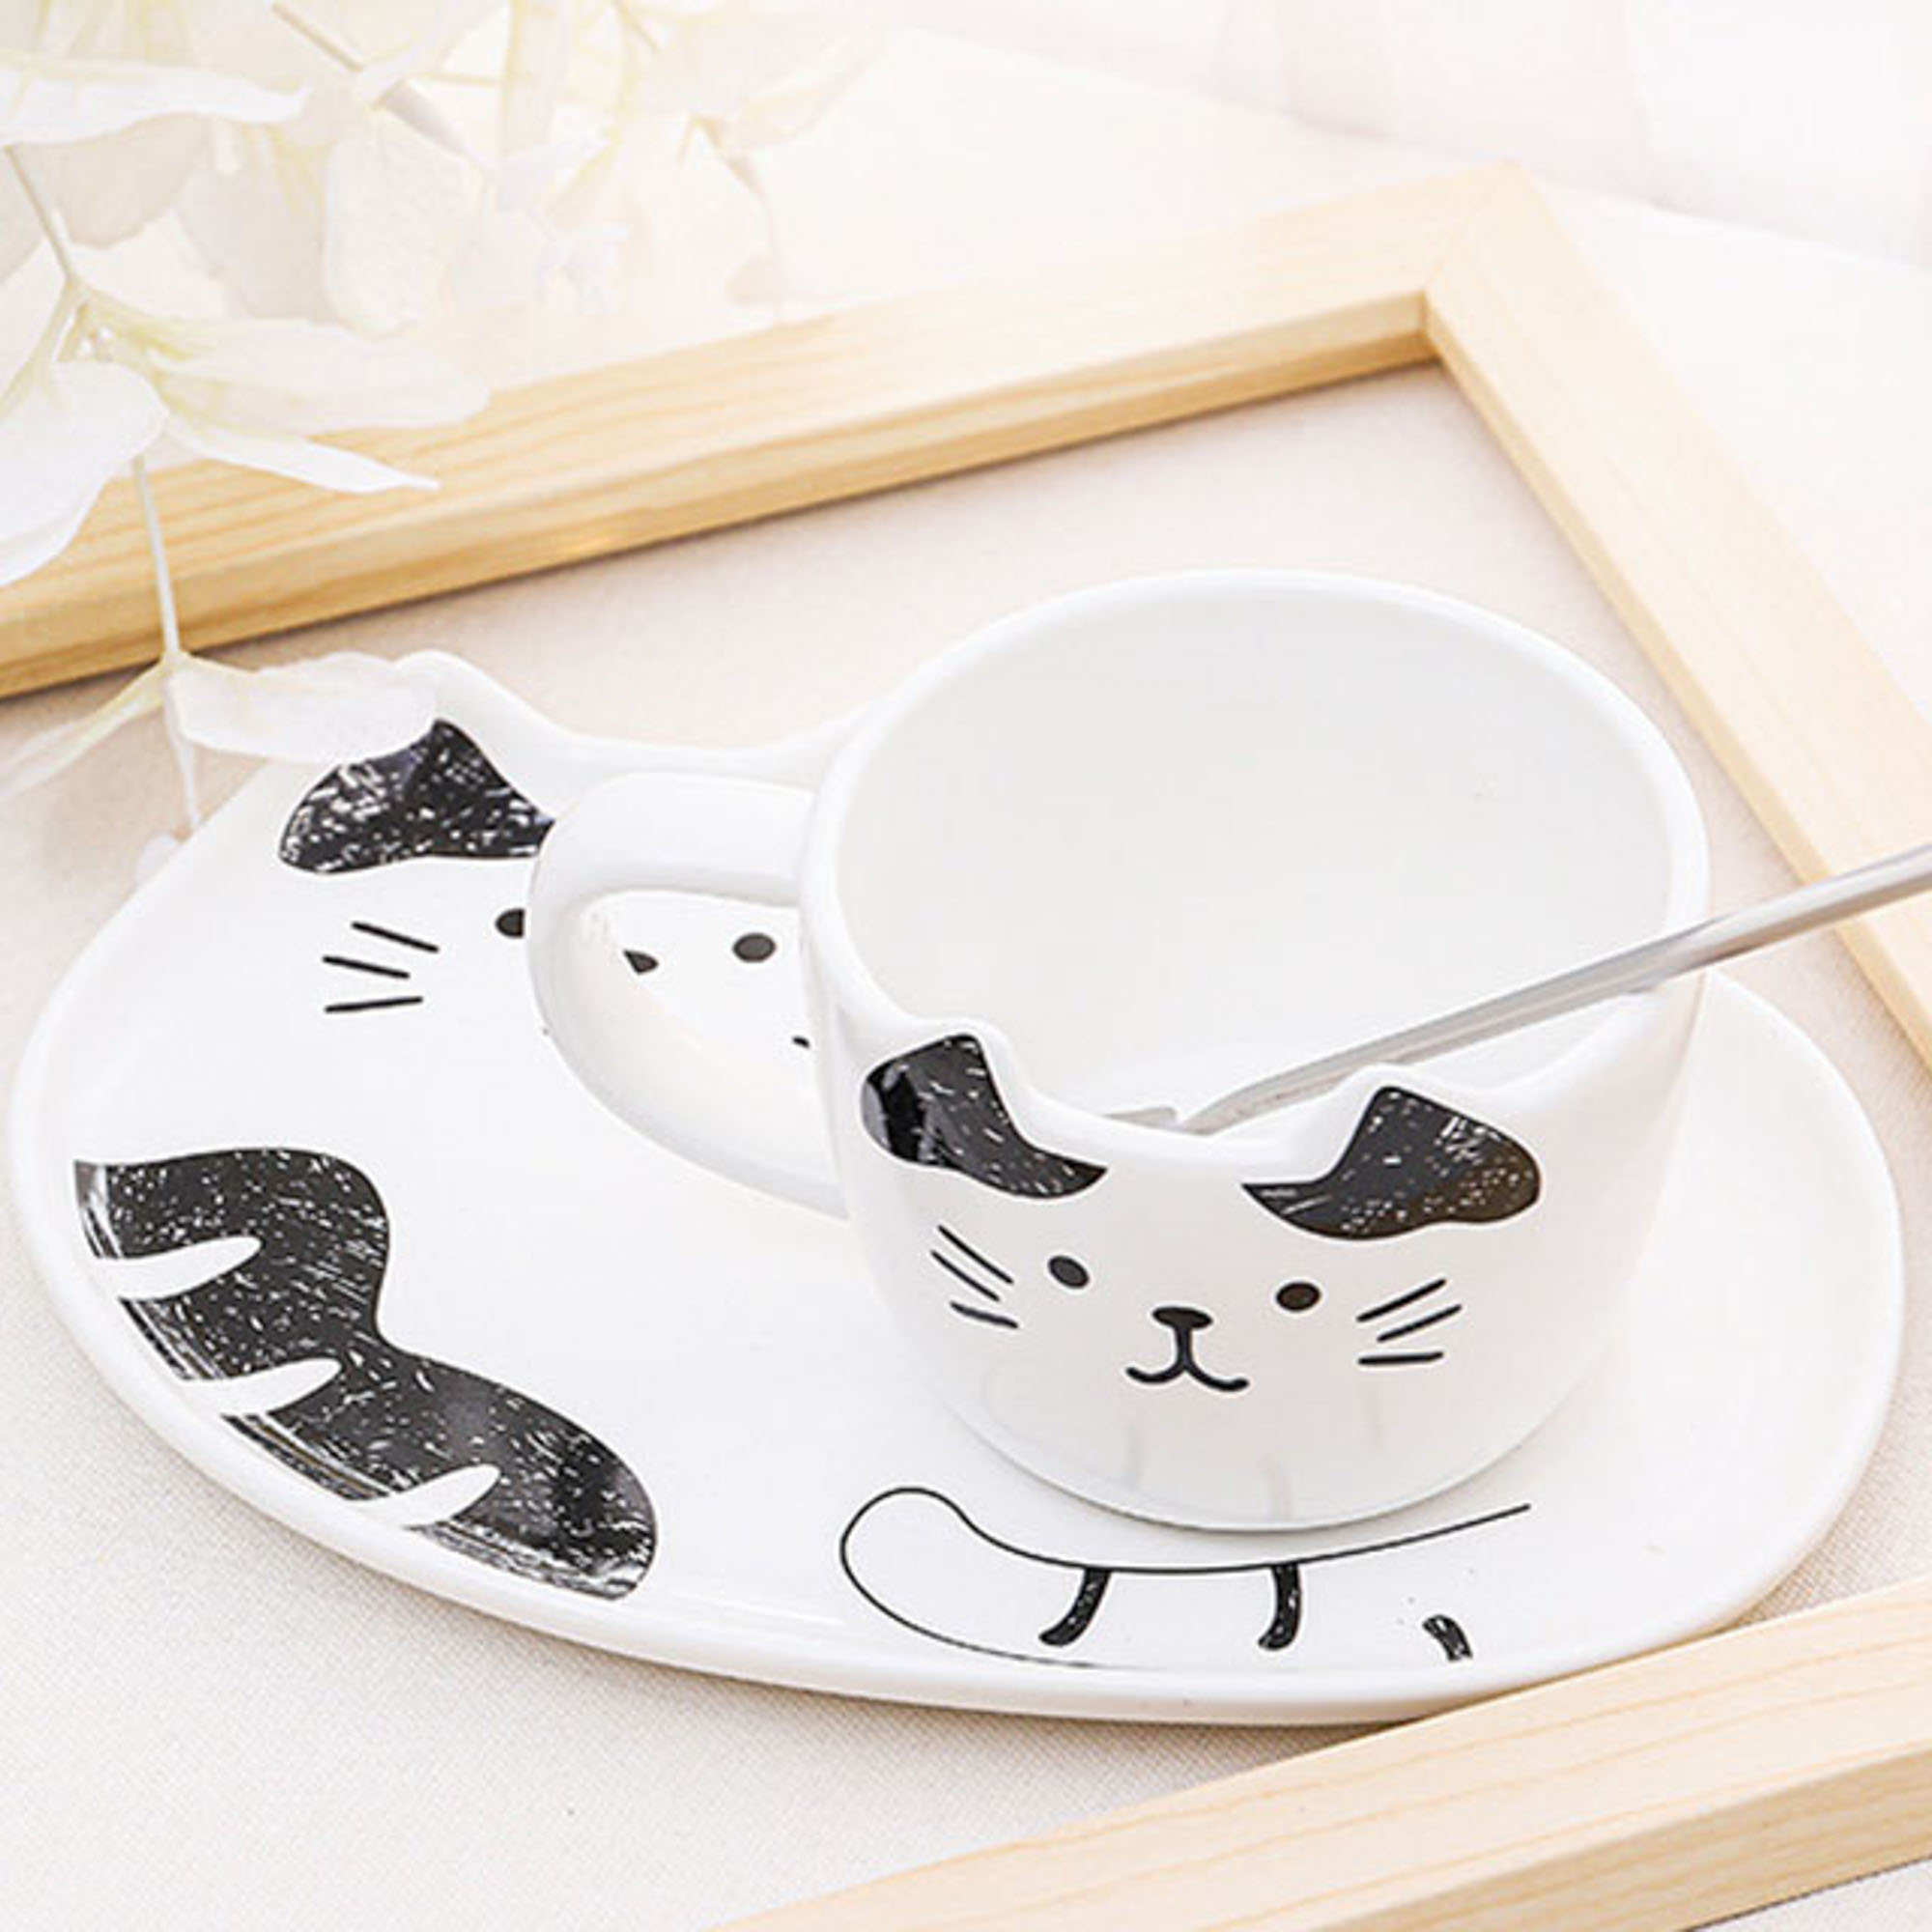 COFFEE CUTE CAT CERAMIC MUG WITH SPOON AND SAUCER NOVELTY